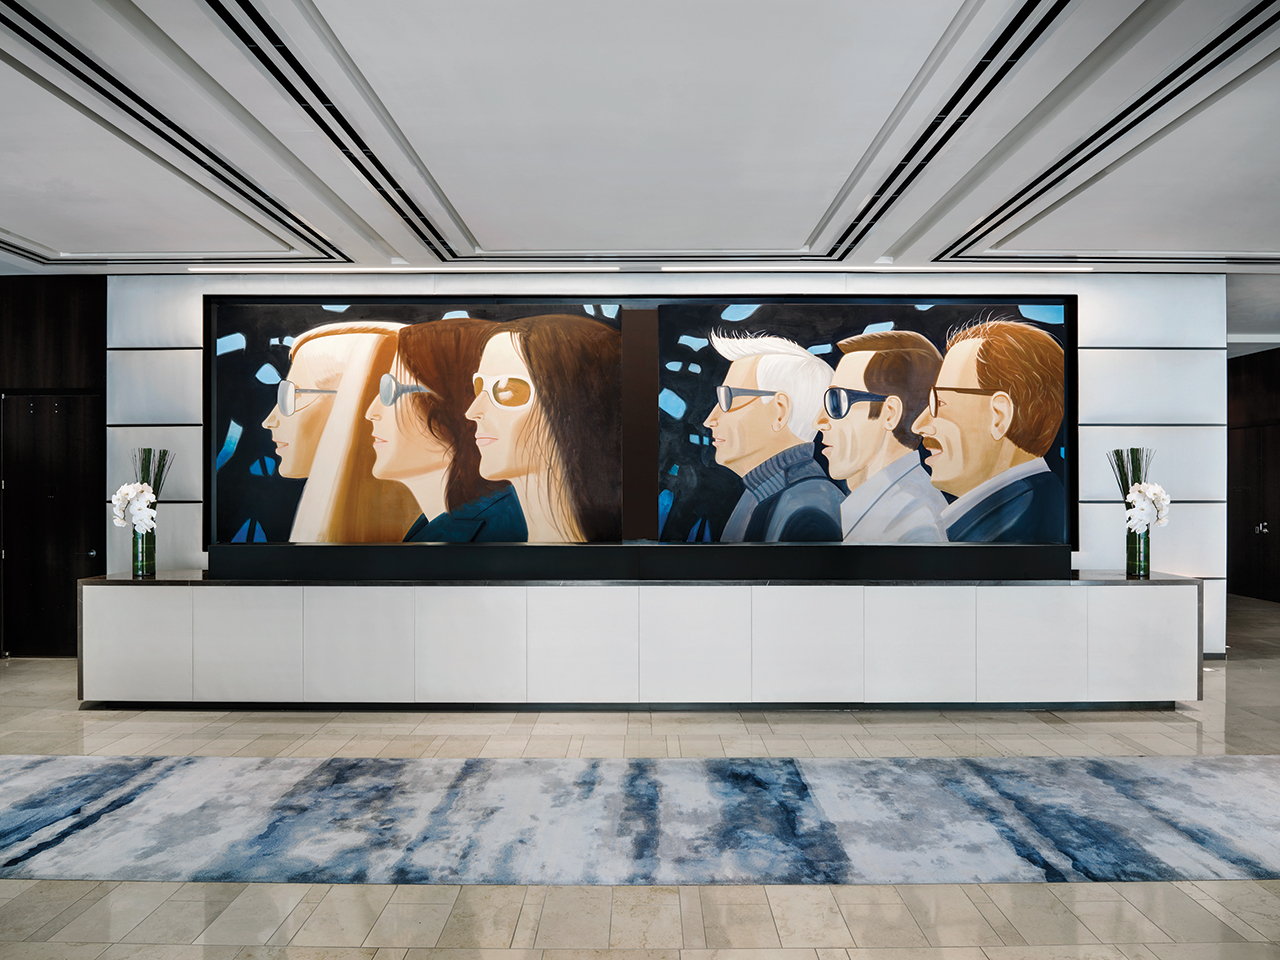 Alex Katz’s Trio displayed at the lobby of New York’s Langham Place